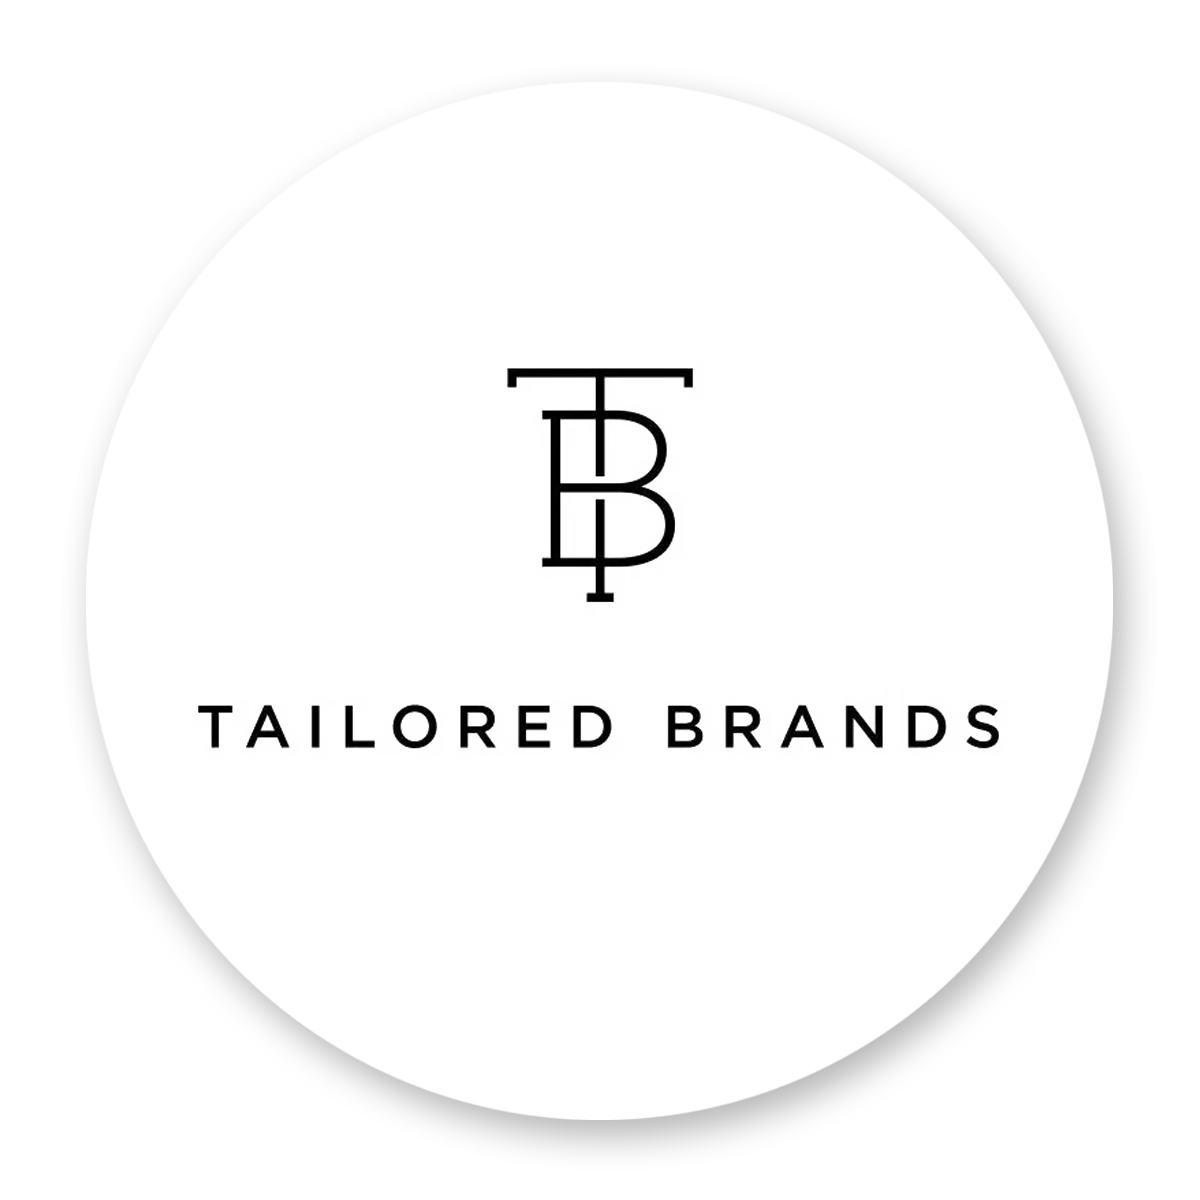 Tailored Brands